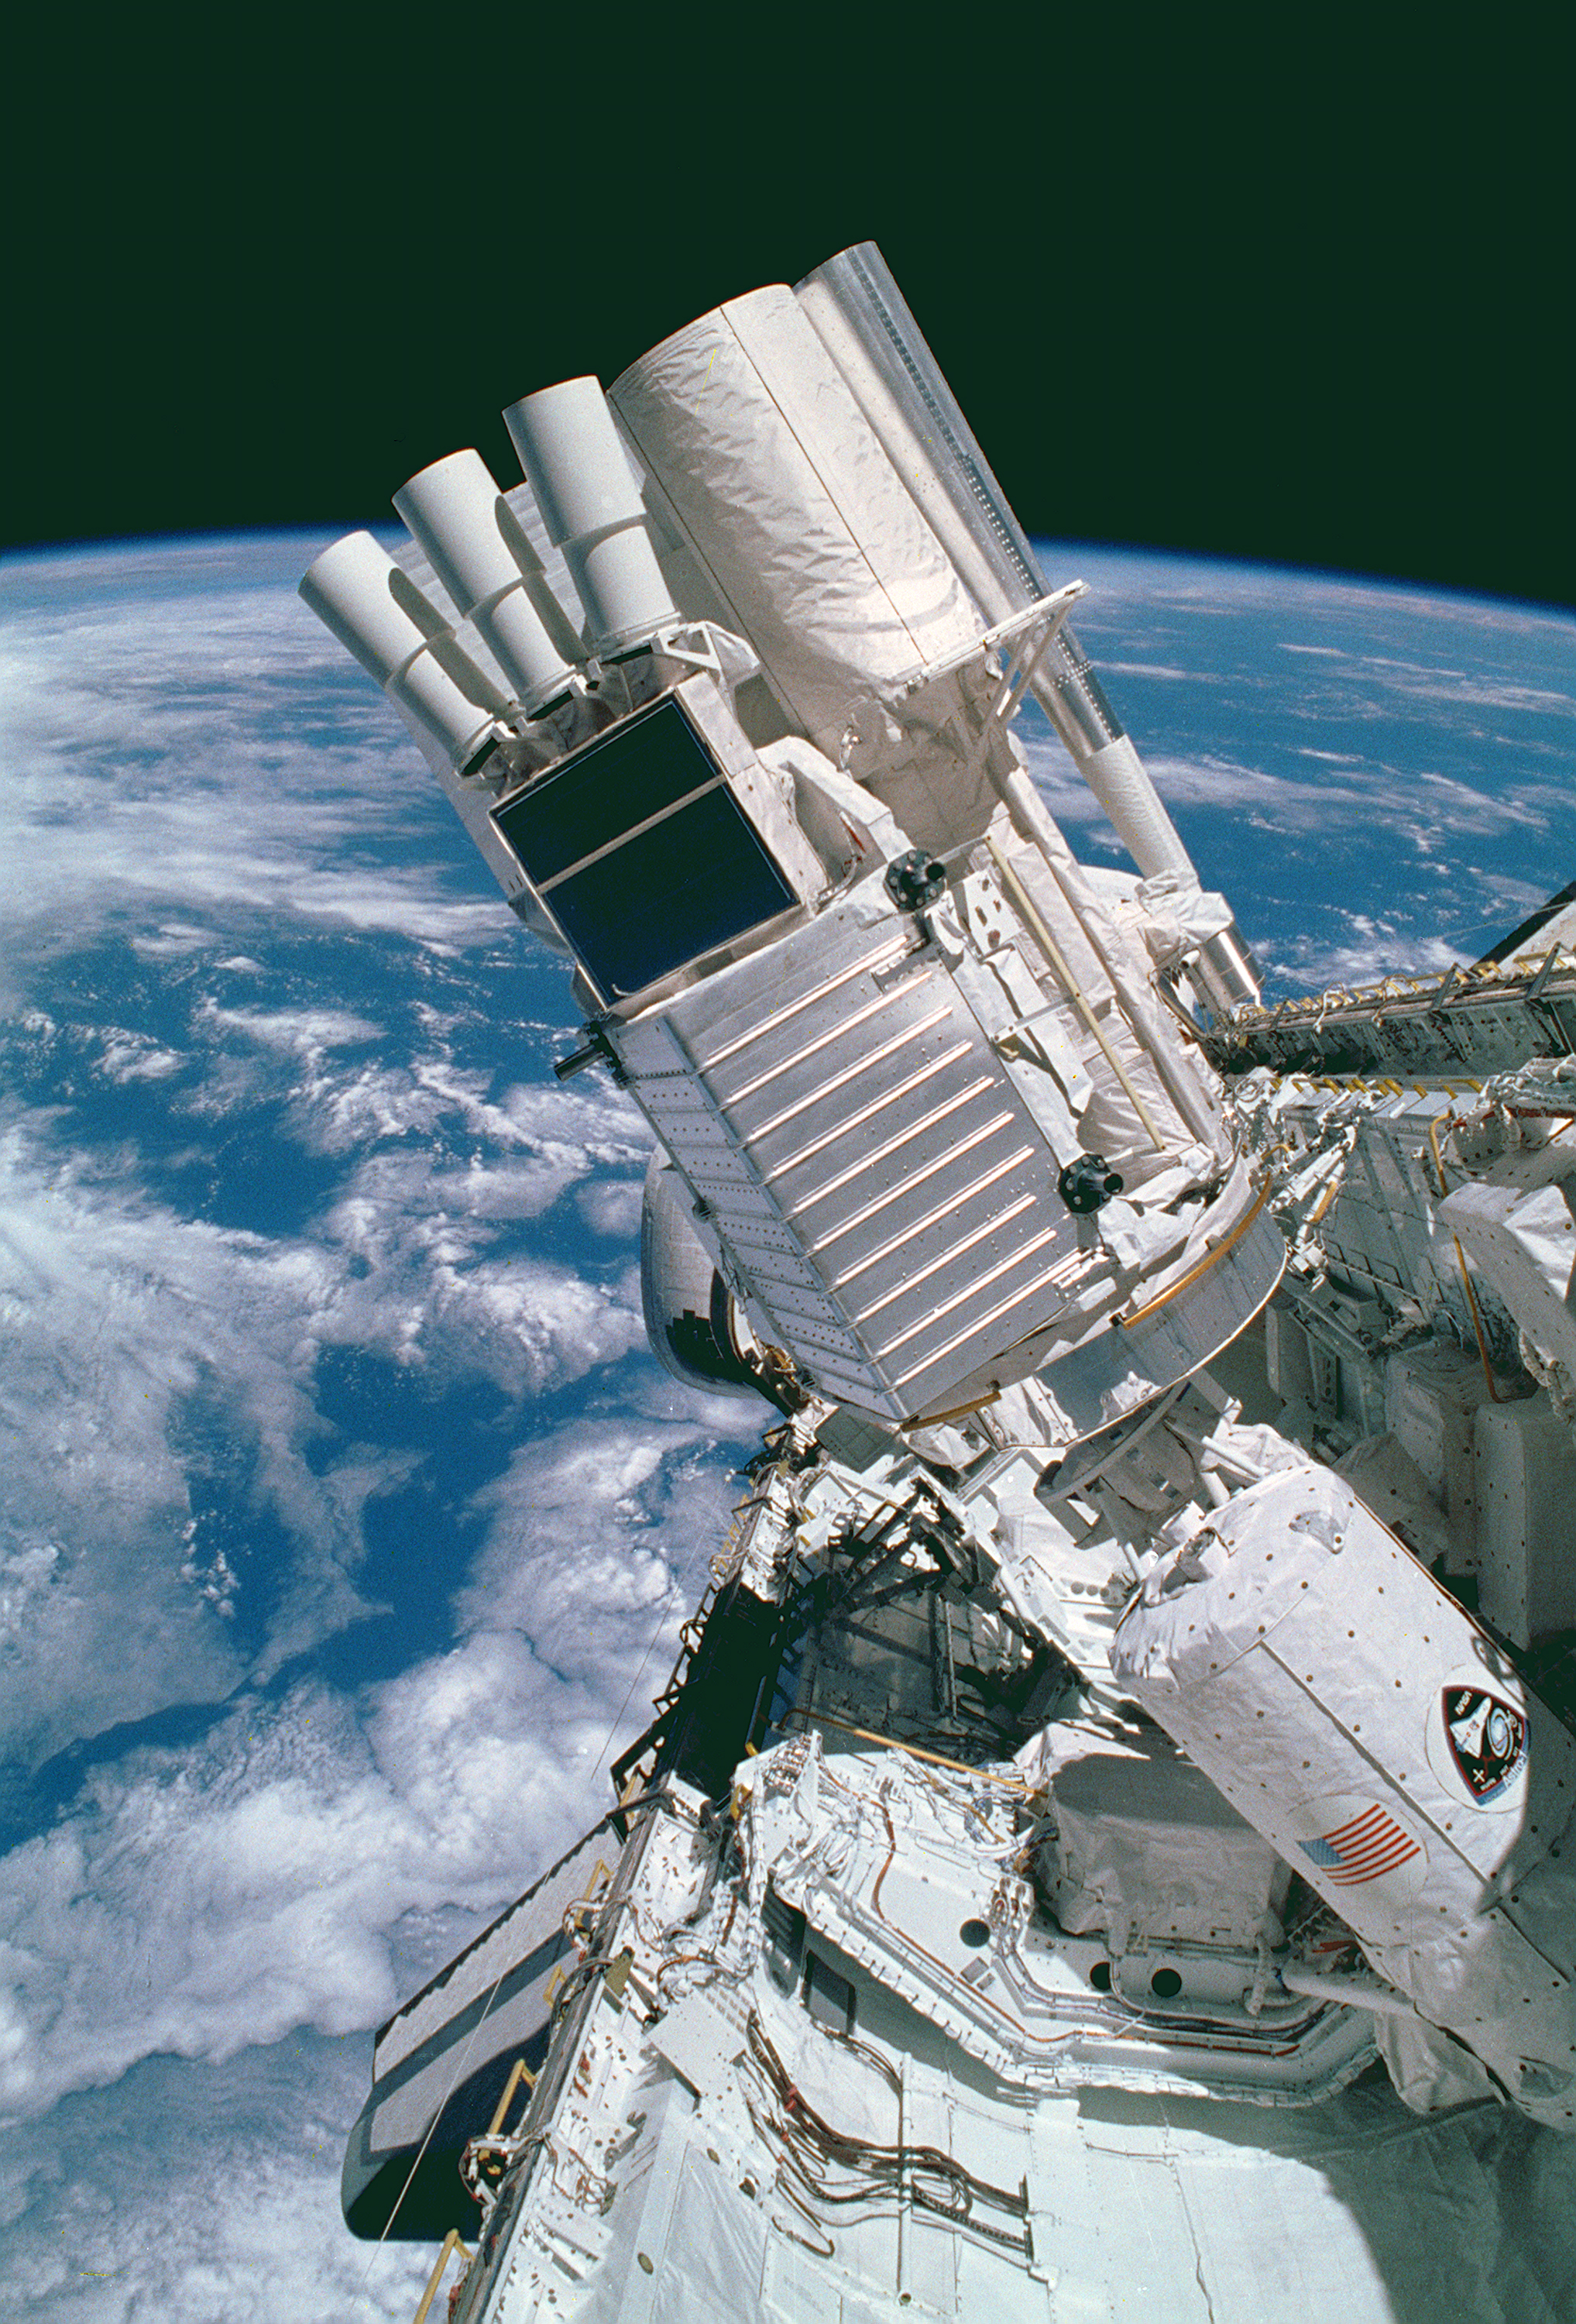 The Astro-1 observatory mounted on the Space Shuttle Columbia.